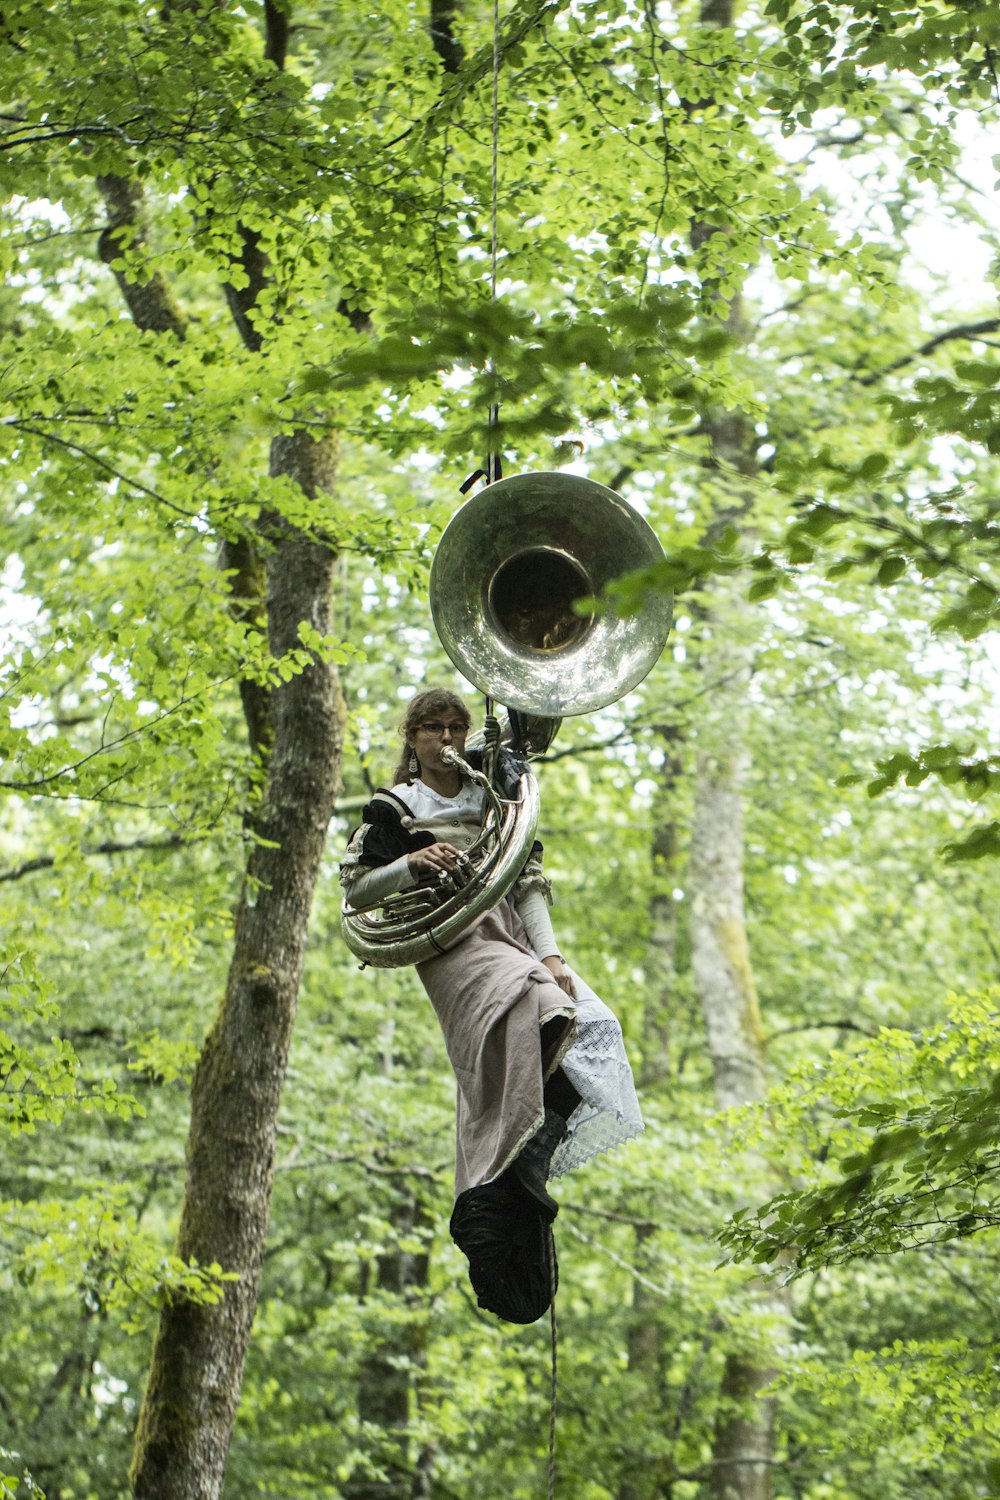 man playing trumpet in forest during daytime